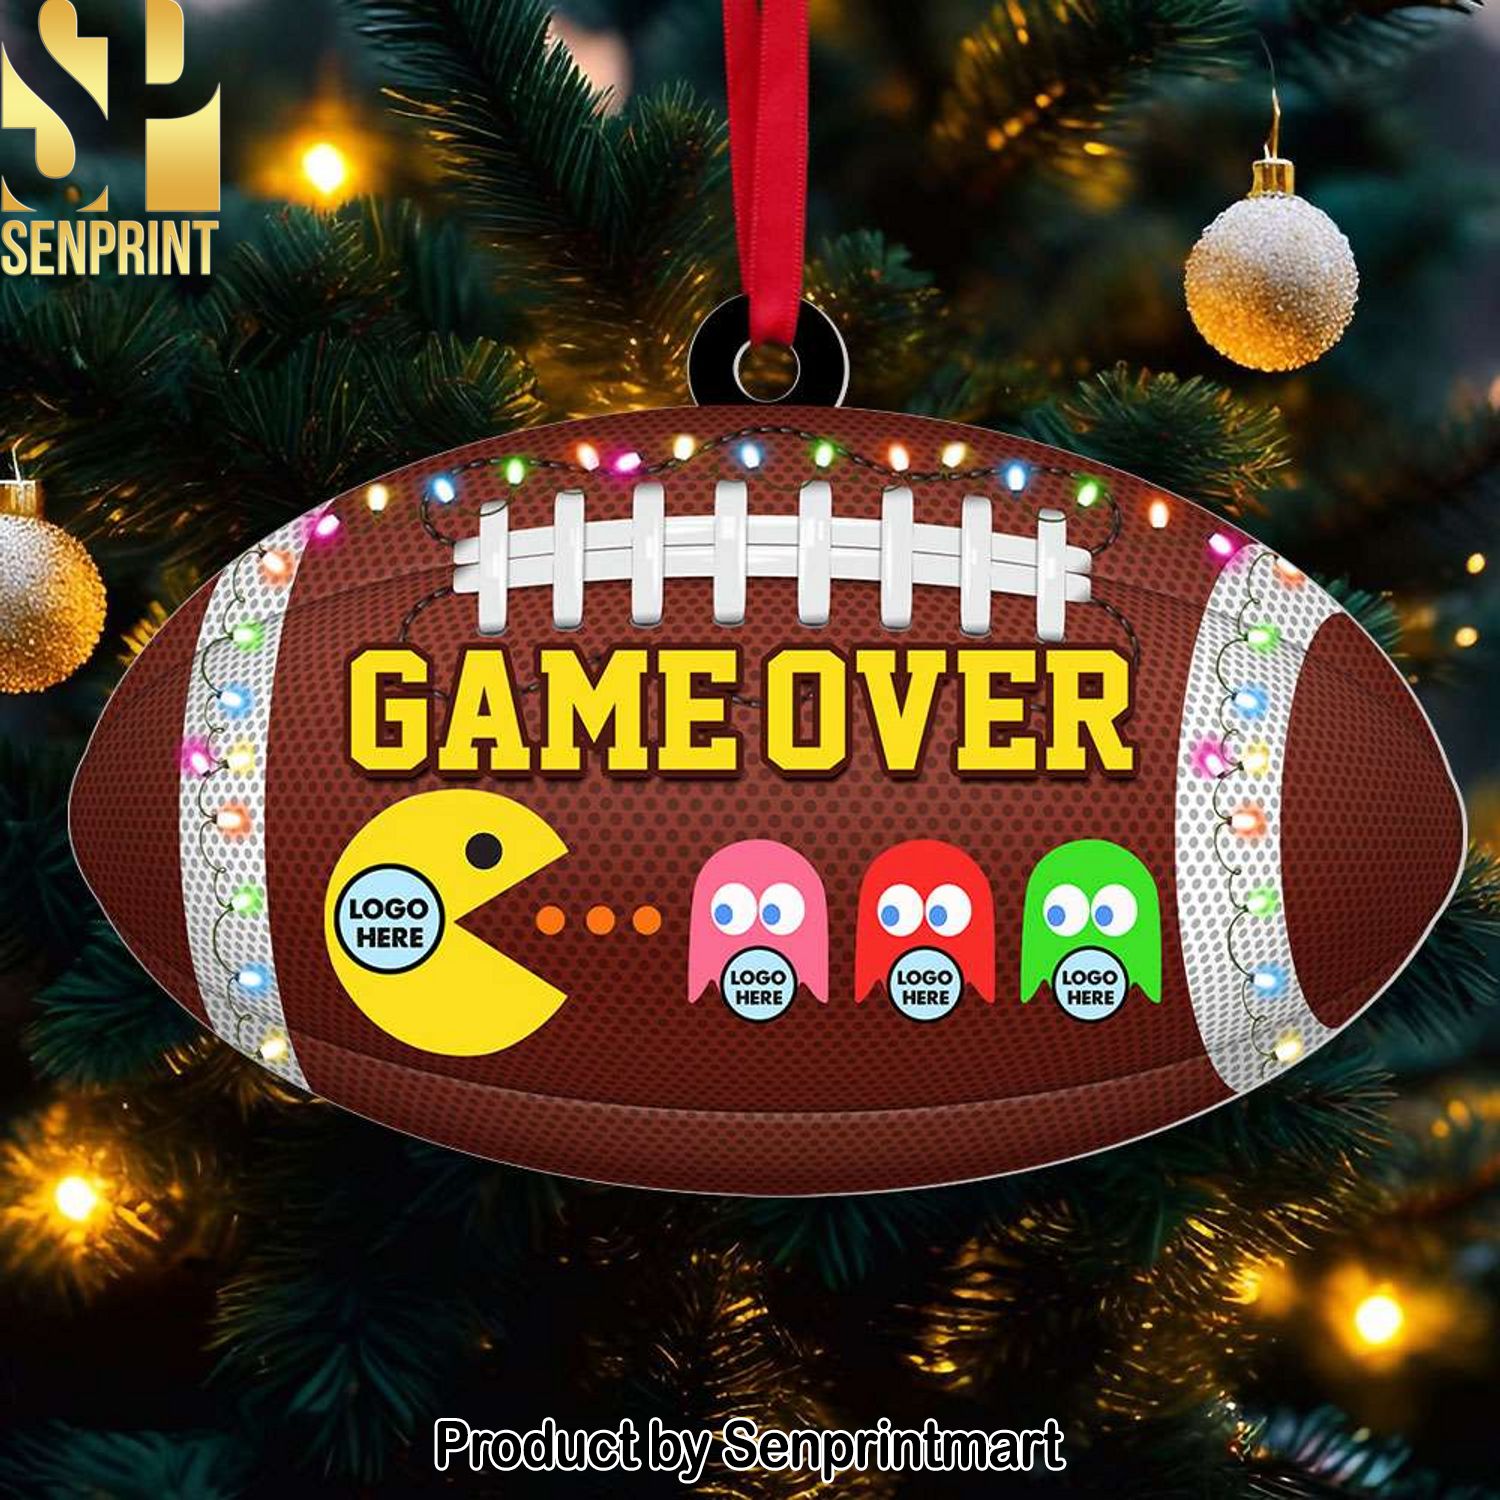 Game Over, Gift For Football Lover, Personalized Acrylic Ornament, Football Game Fan Ornament, Christmas Gift